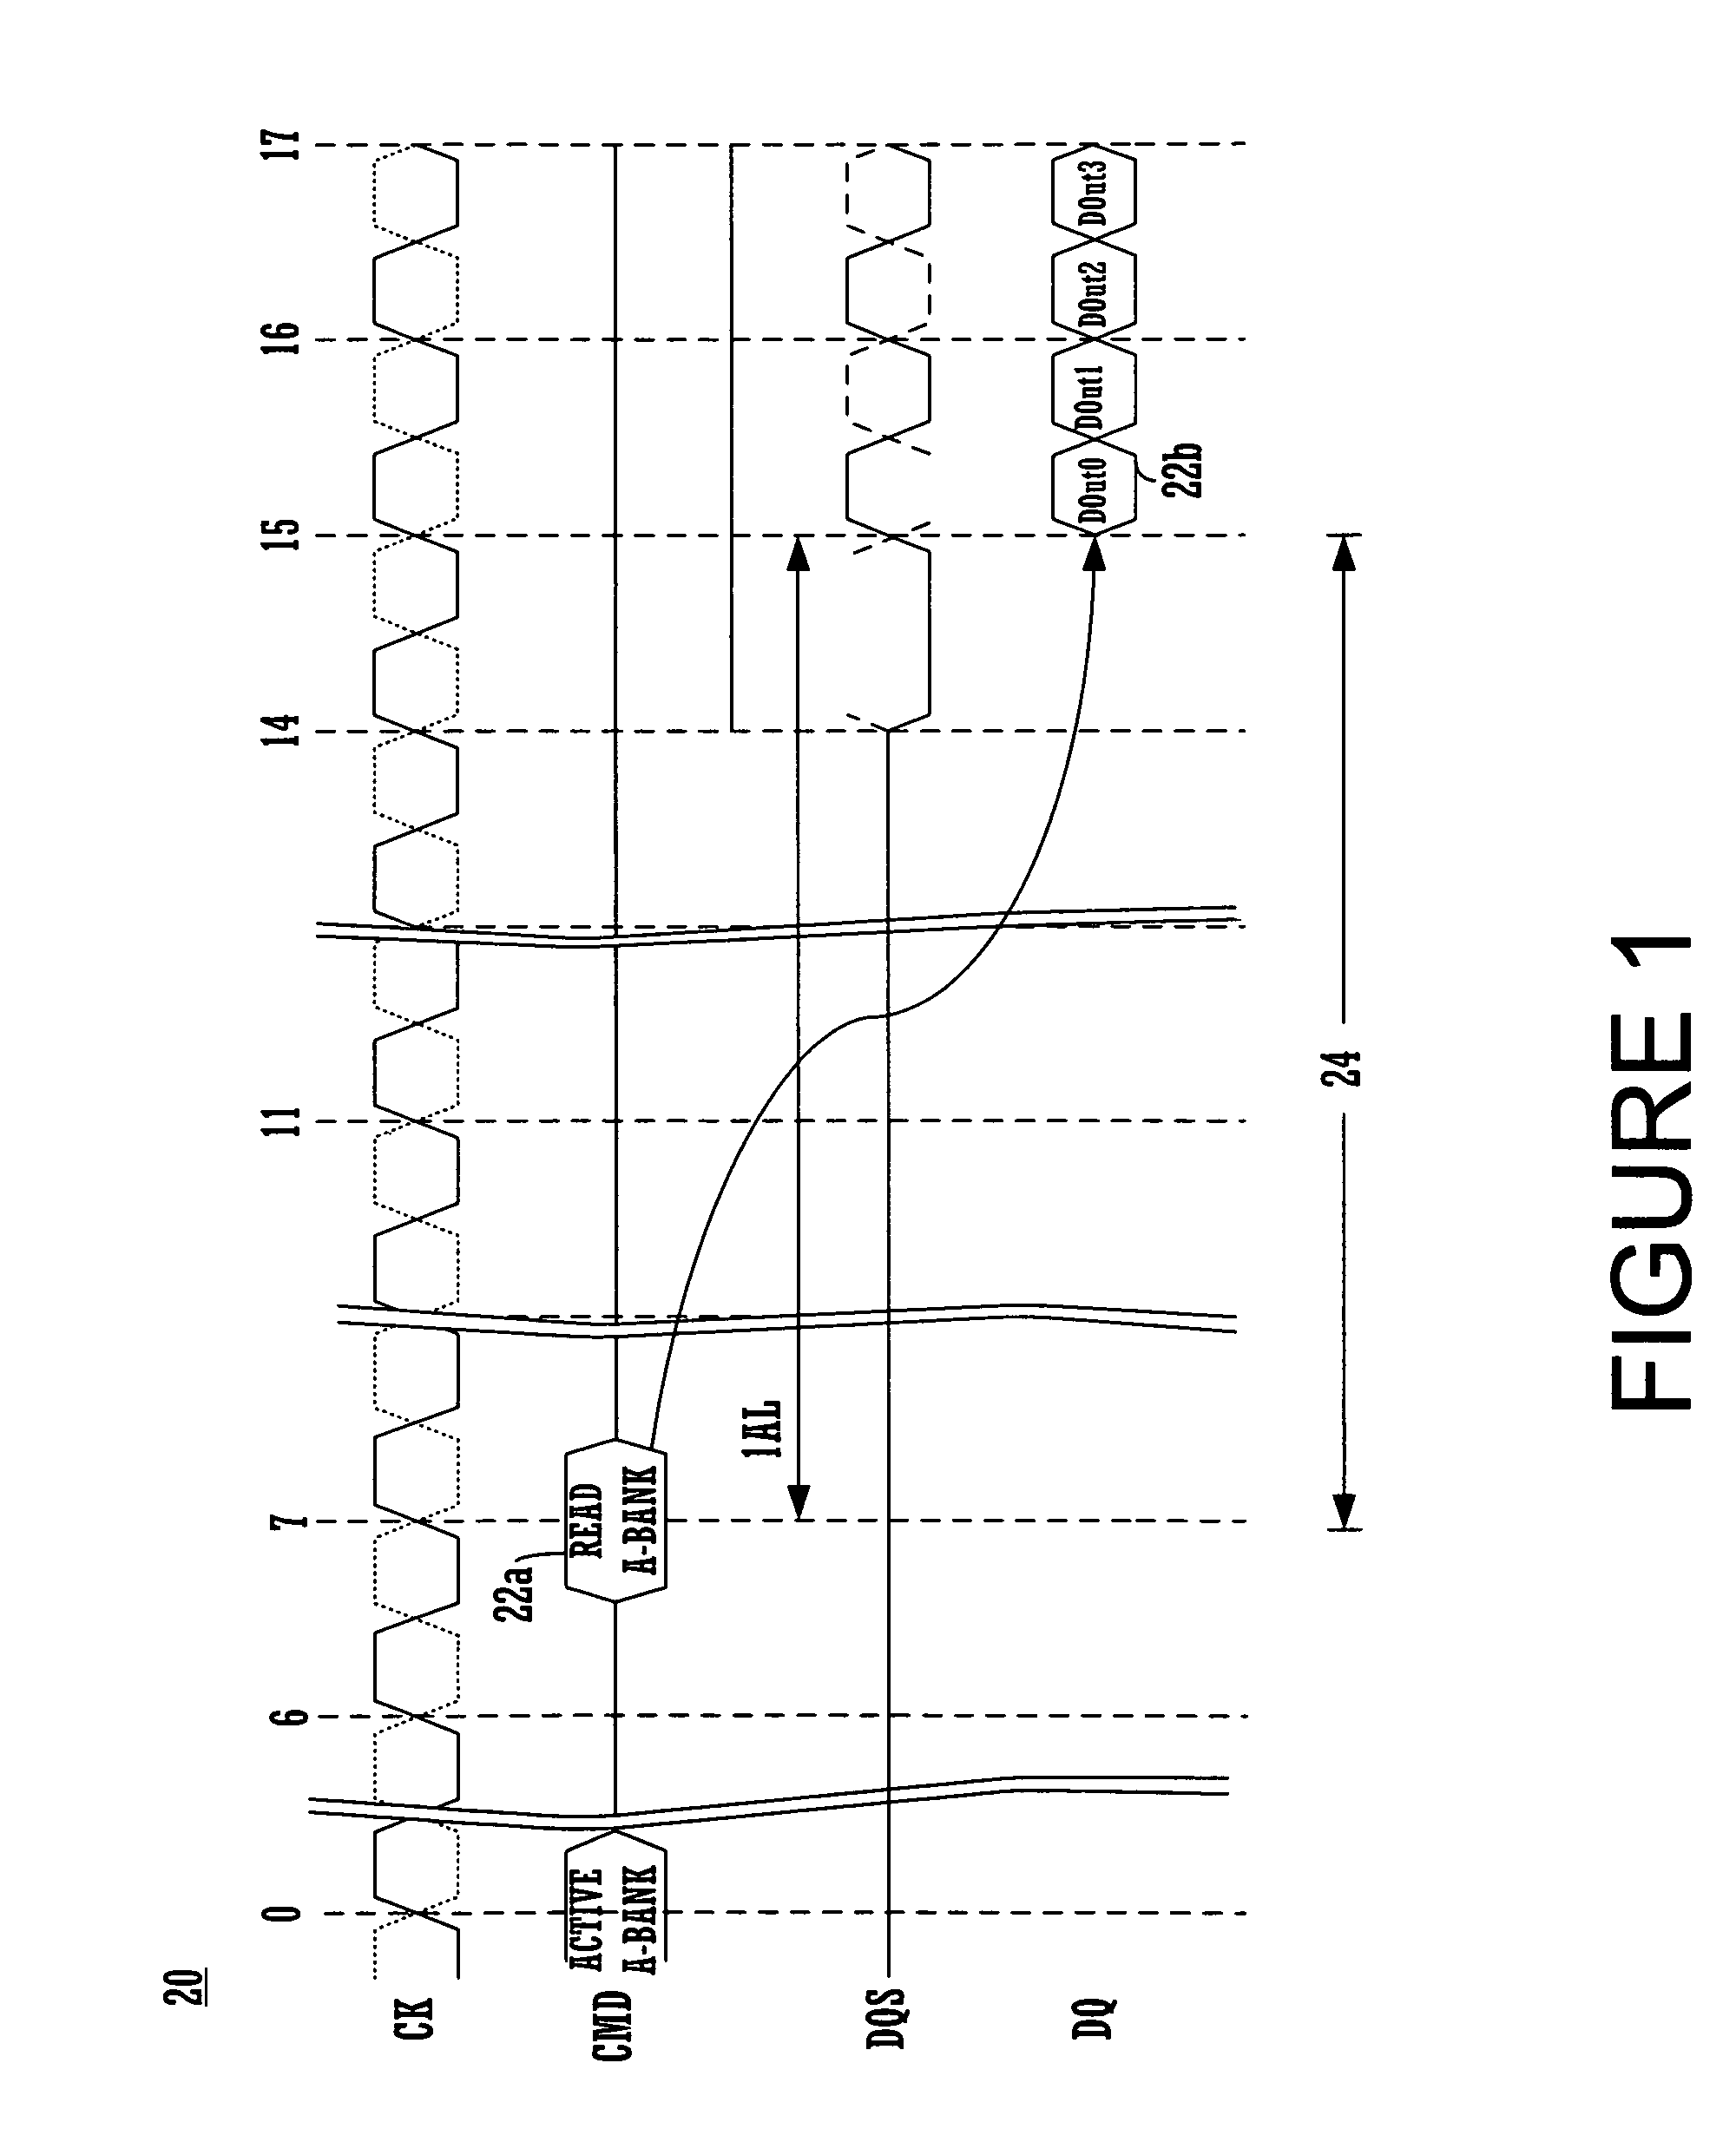 Method and system for efficiently executing reads after writes in a memory employing delayed write data